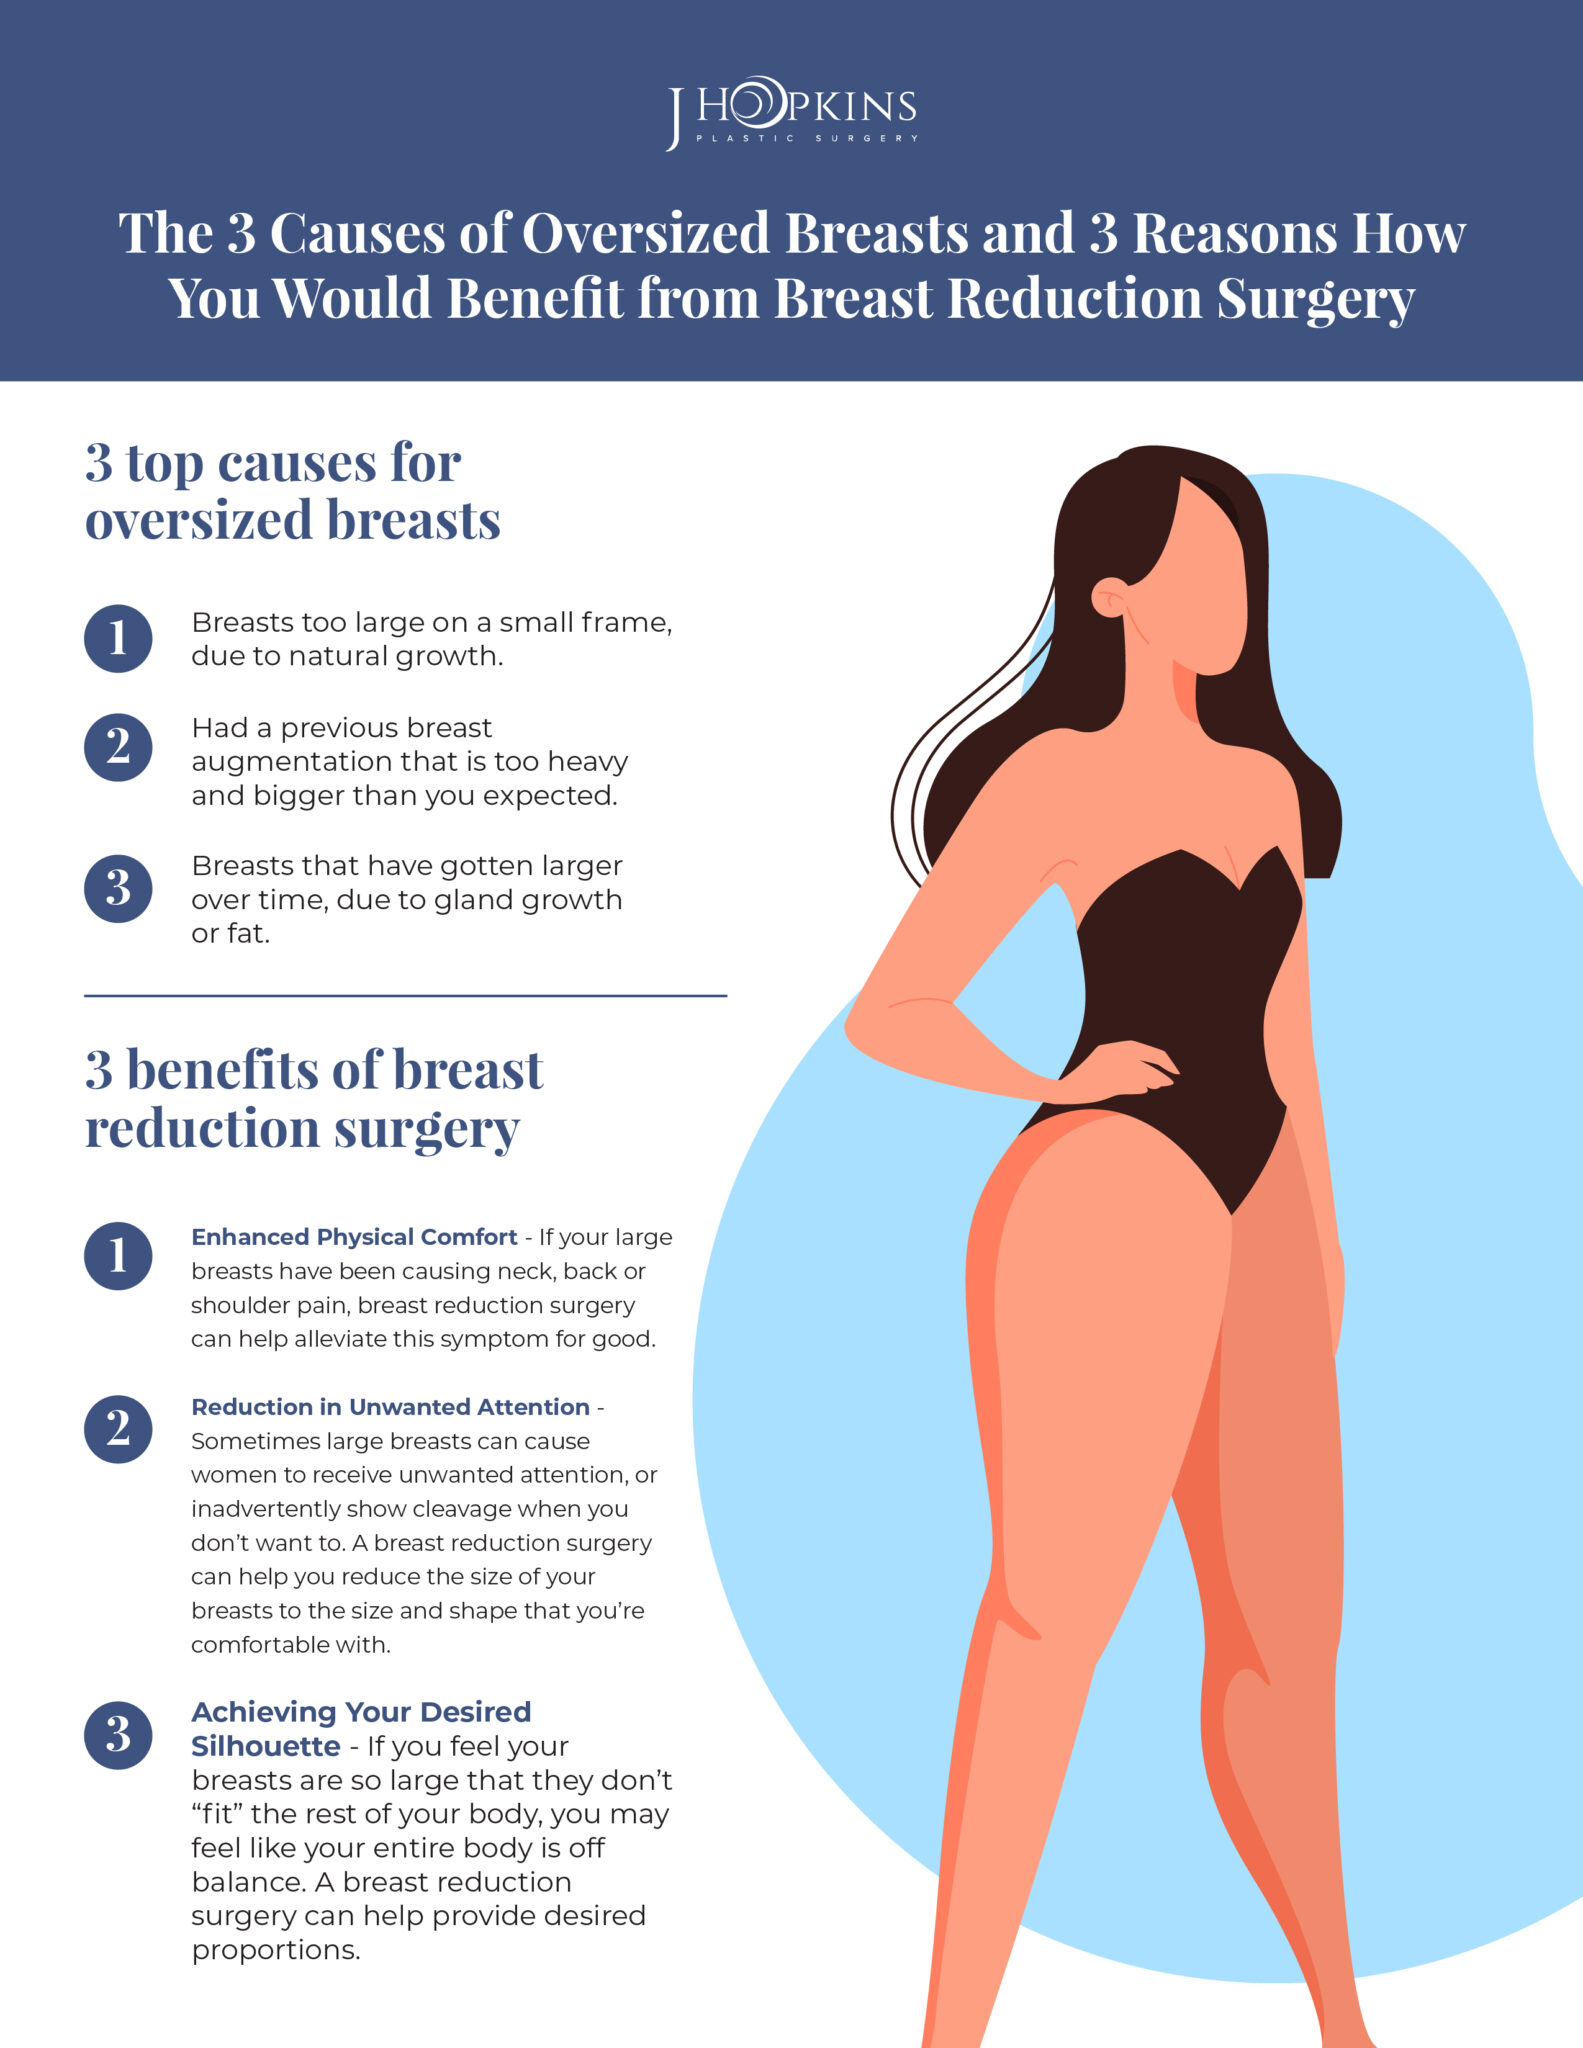 Taking a load off your shoulders: Breast Reduction